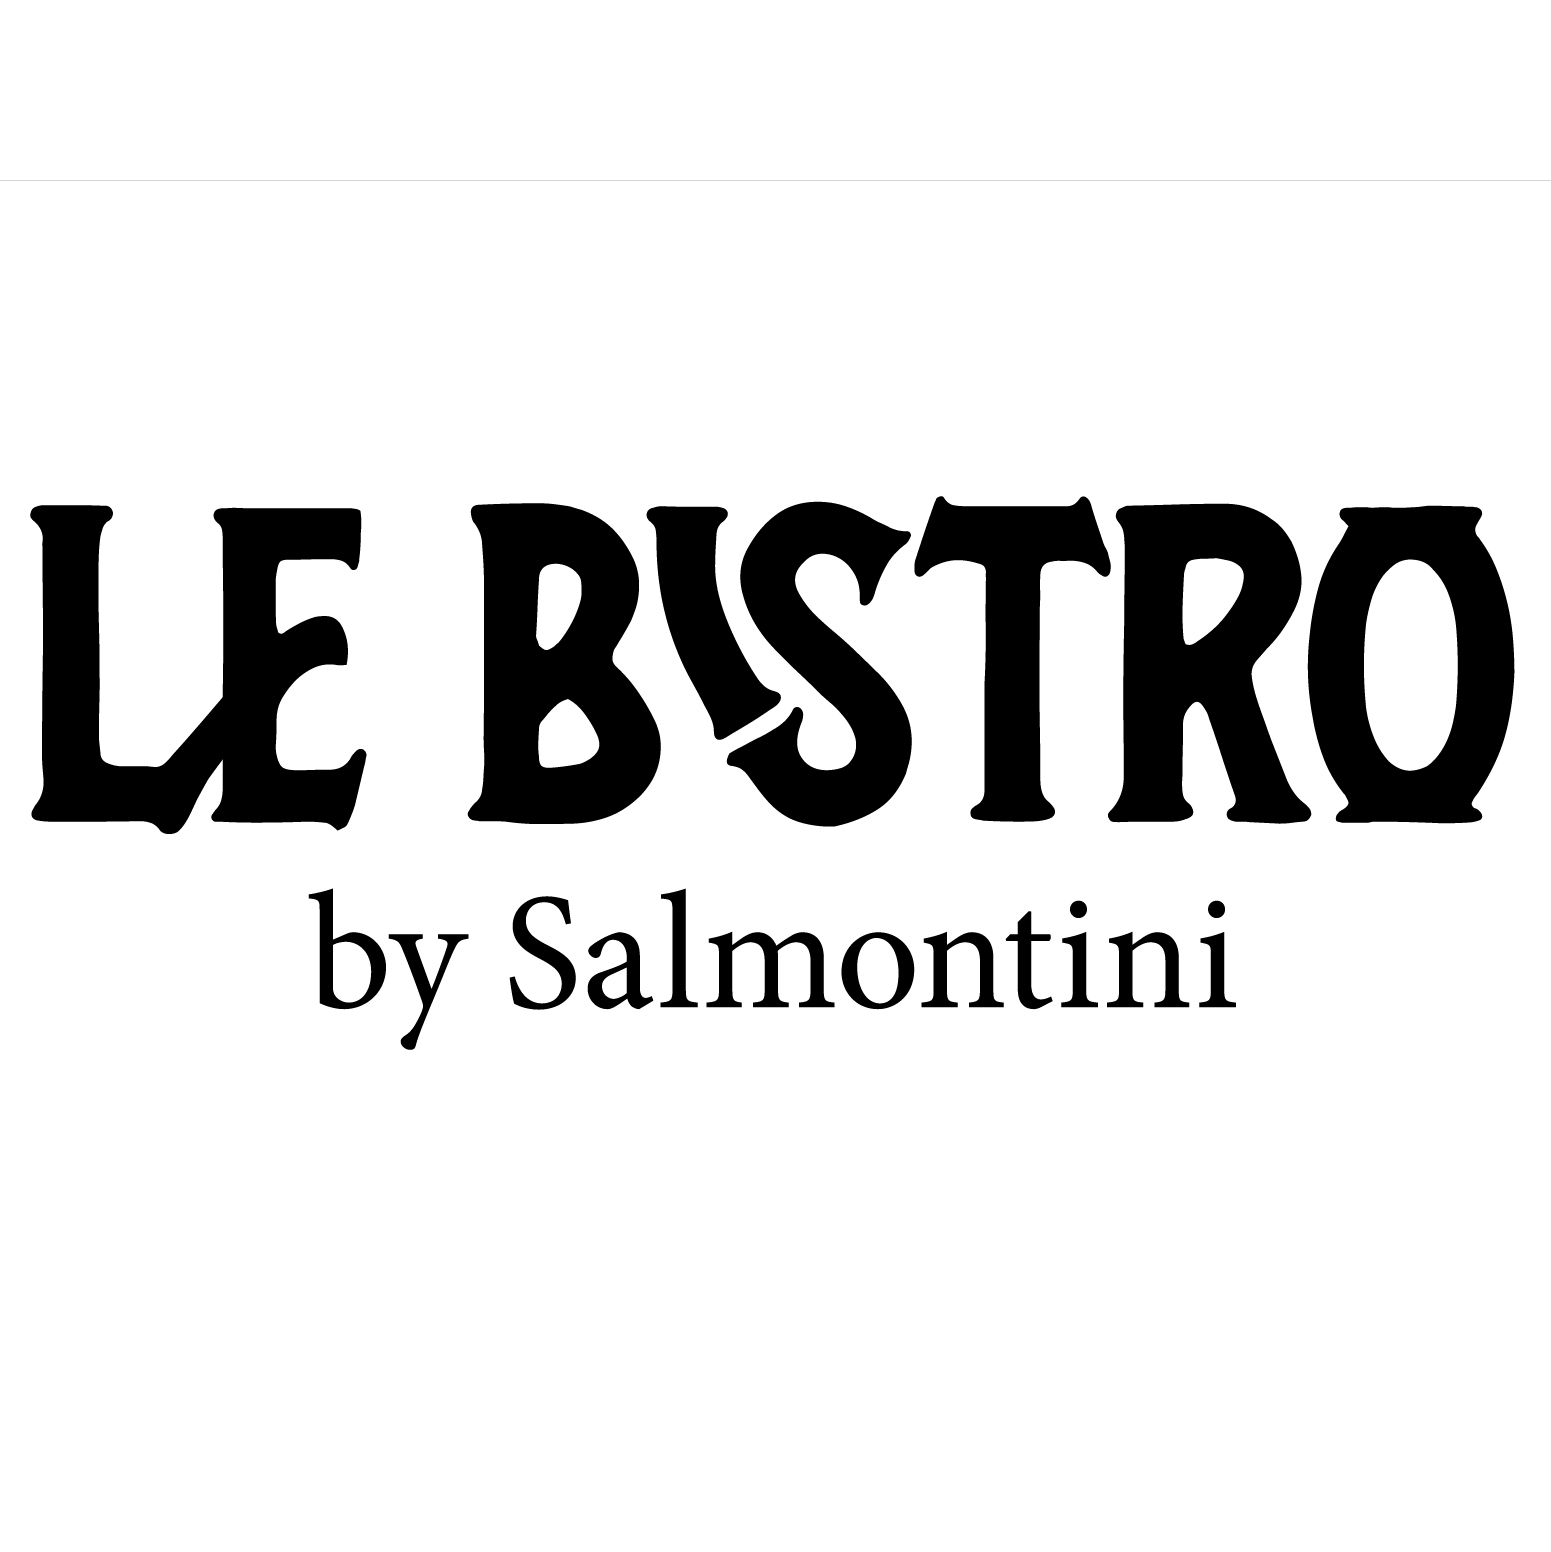 Le Bistro by Salmontini serves mouth-watering, wholesome comfort bistro food, largely ingredient-driven, sparking from its famous smoked salmon, at the heart of the “maison’s” long-standing reputation